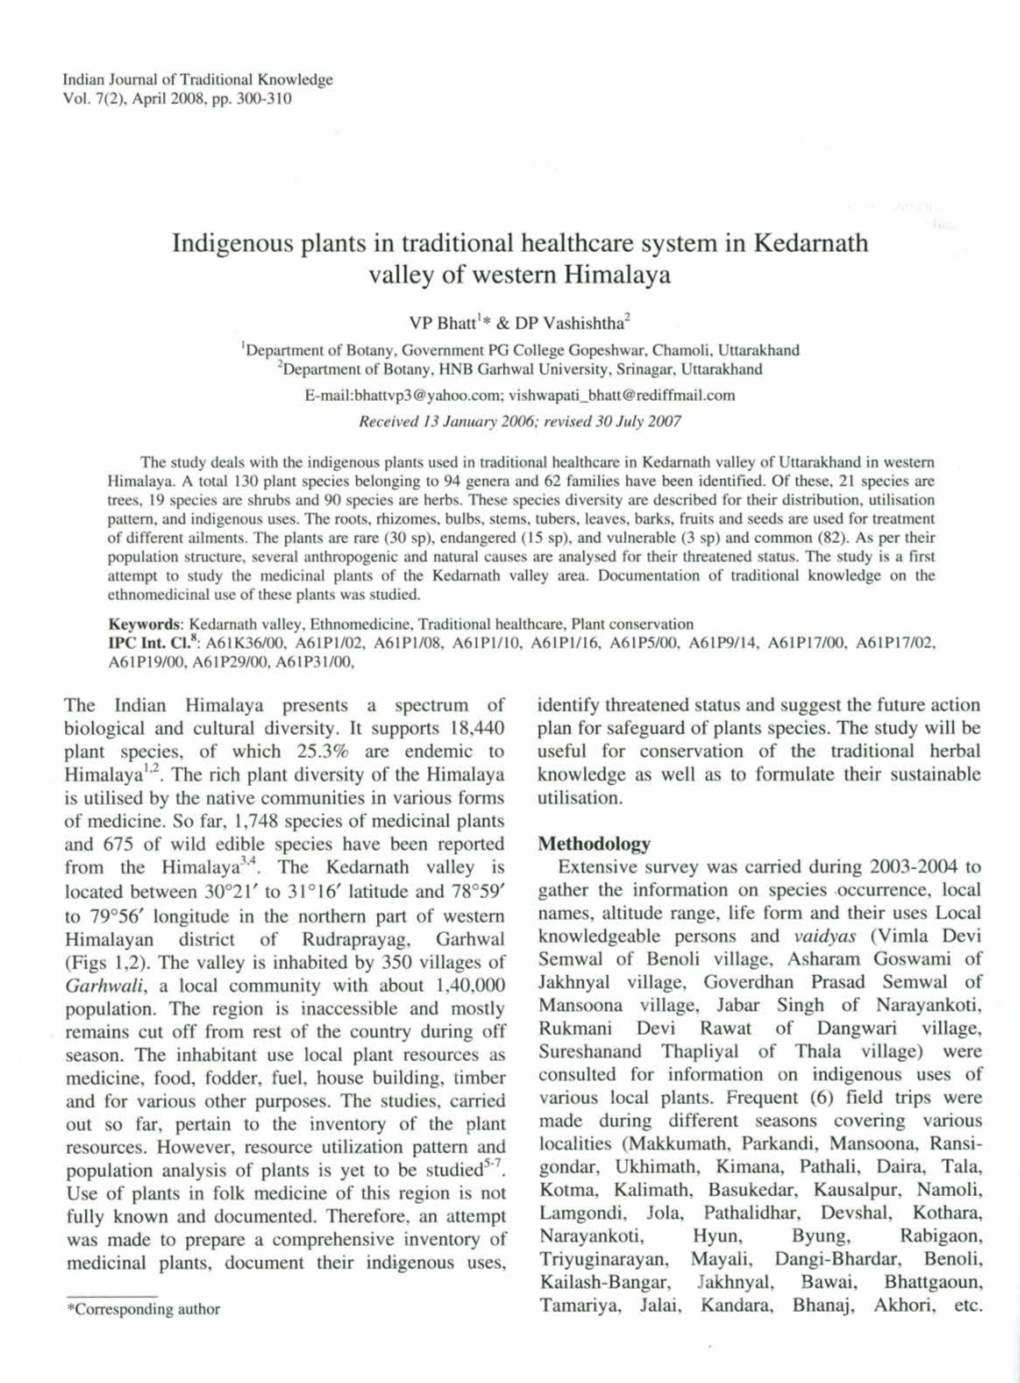 Indigenous Plants in Traditional Healthcare System in Kedarnath Valley of Western Himalaya